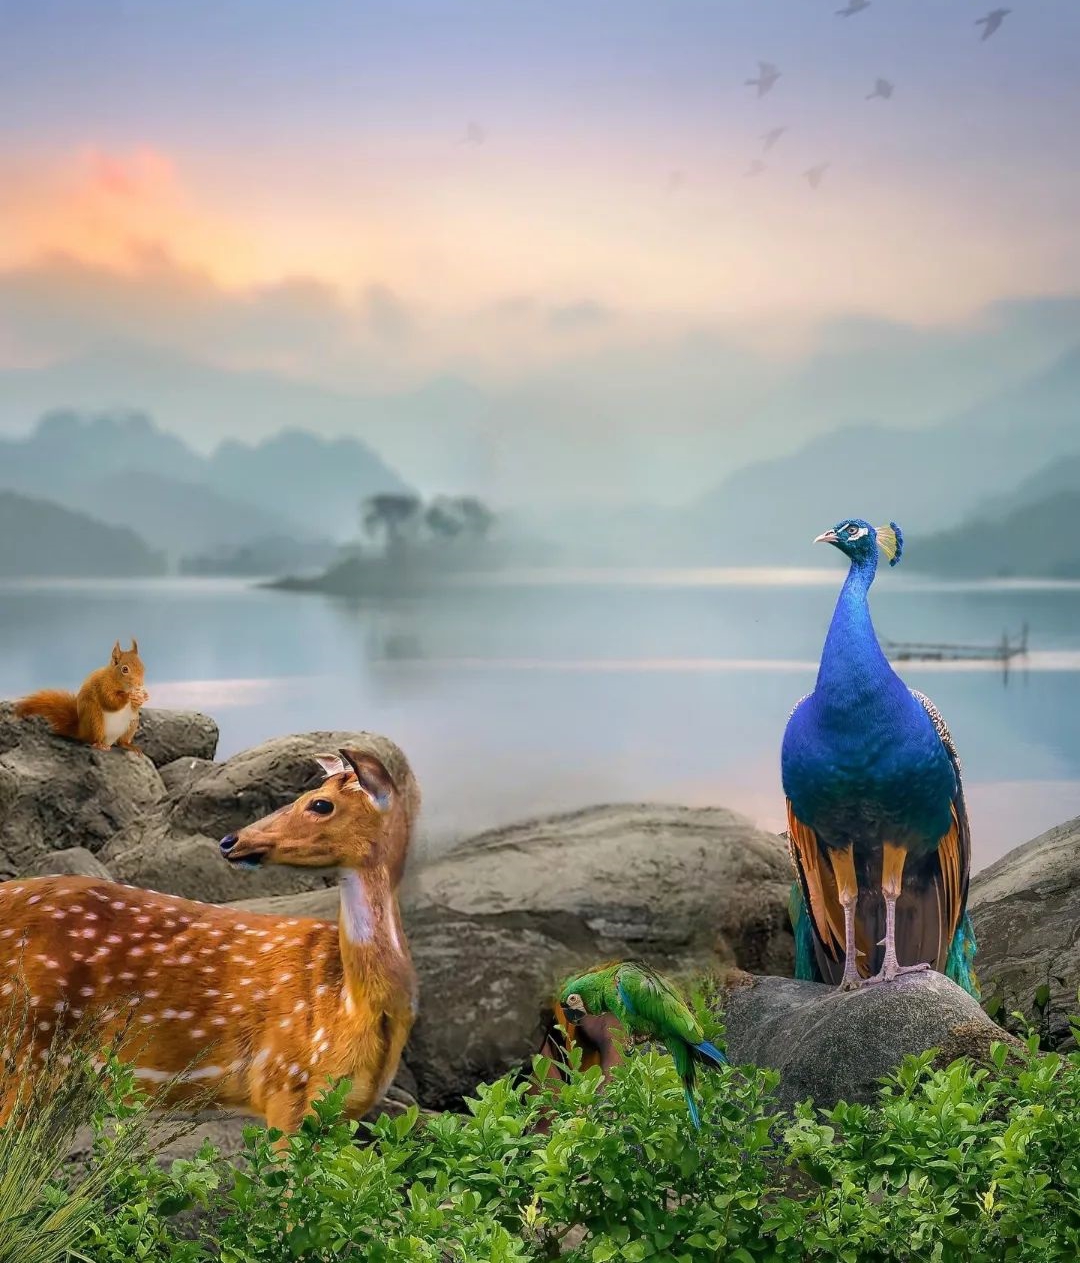 Peacock And Nature Picsart Photo Editing Background 